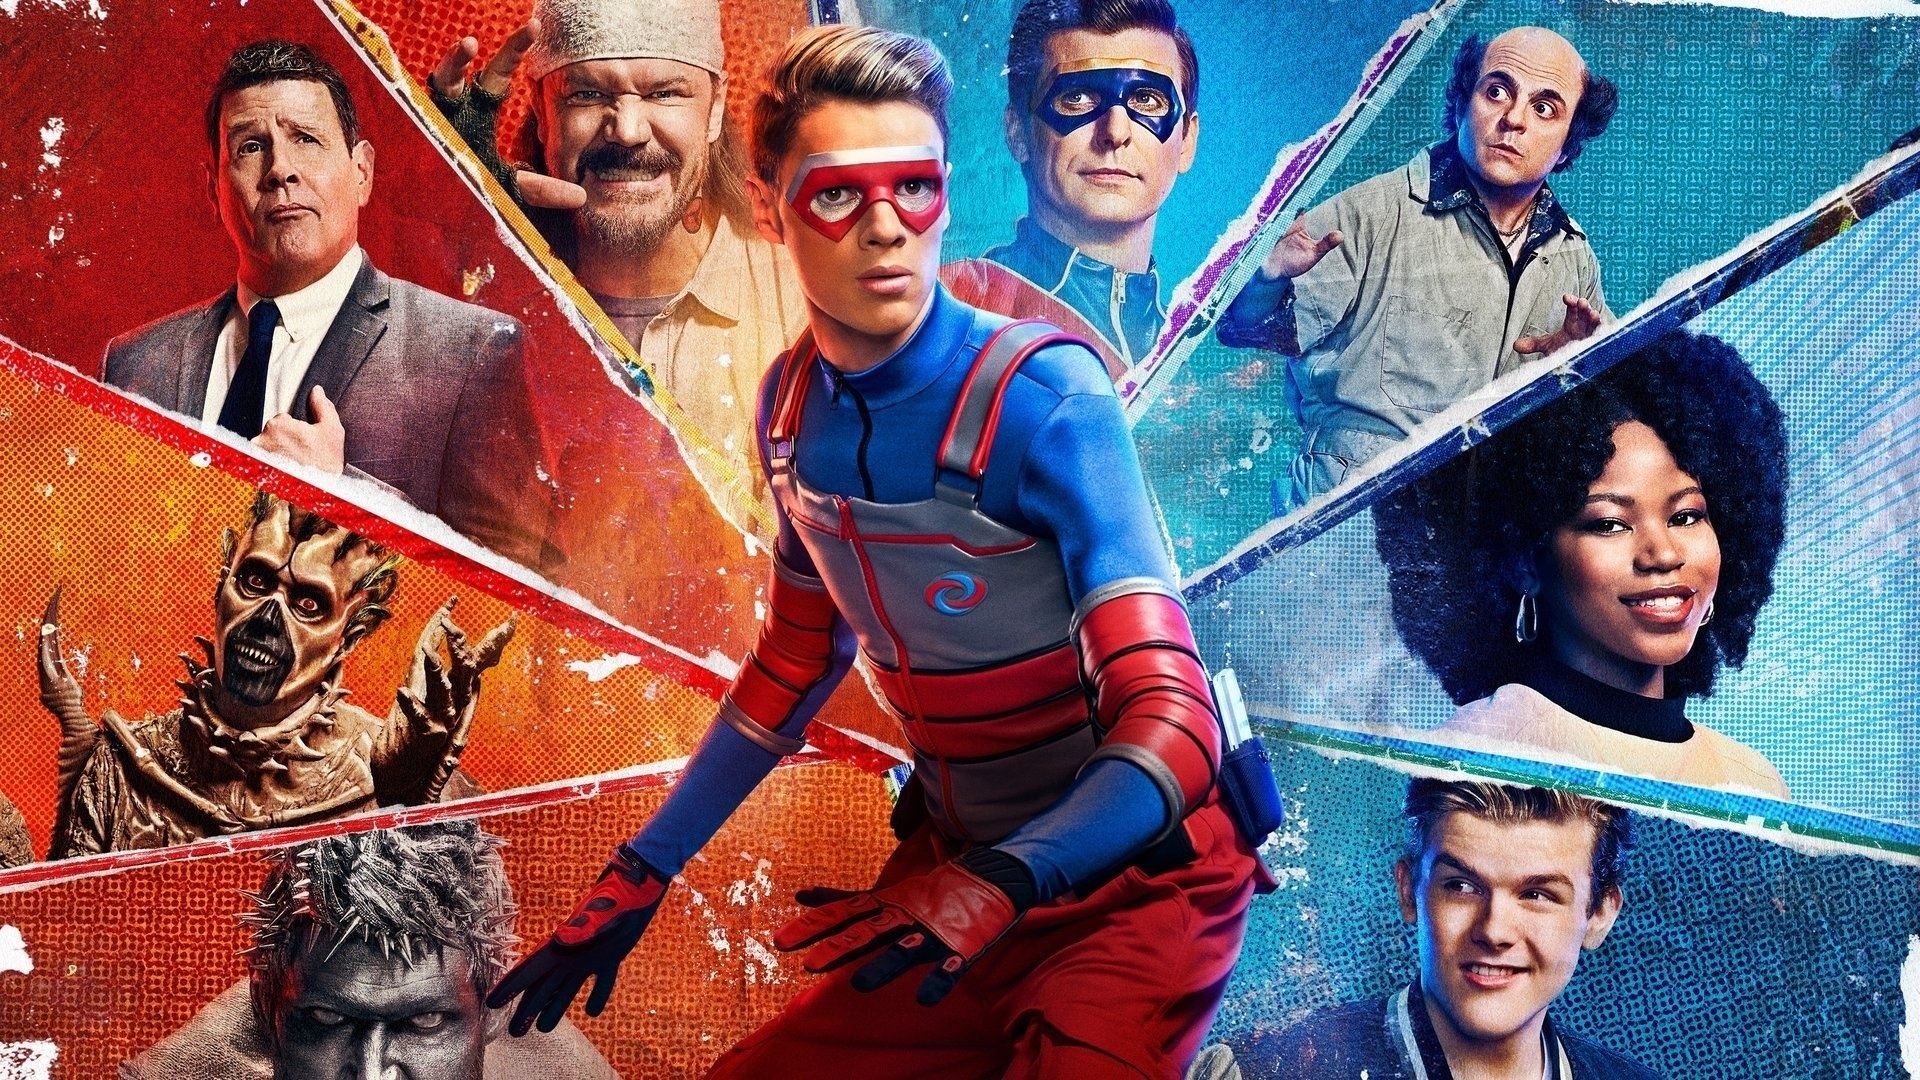 Henry Danger wallpapers, HD quality, Epic scenes, Action-packed adventures, 1920x1080 Full HD Desktop